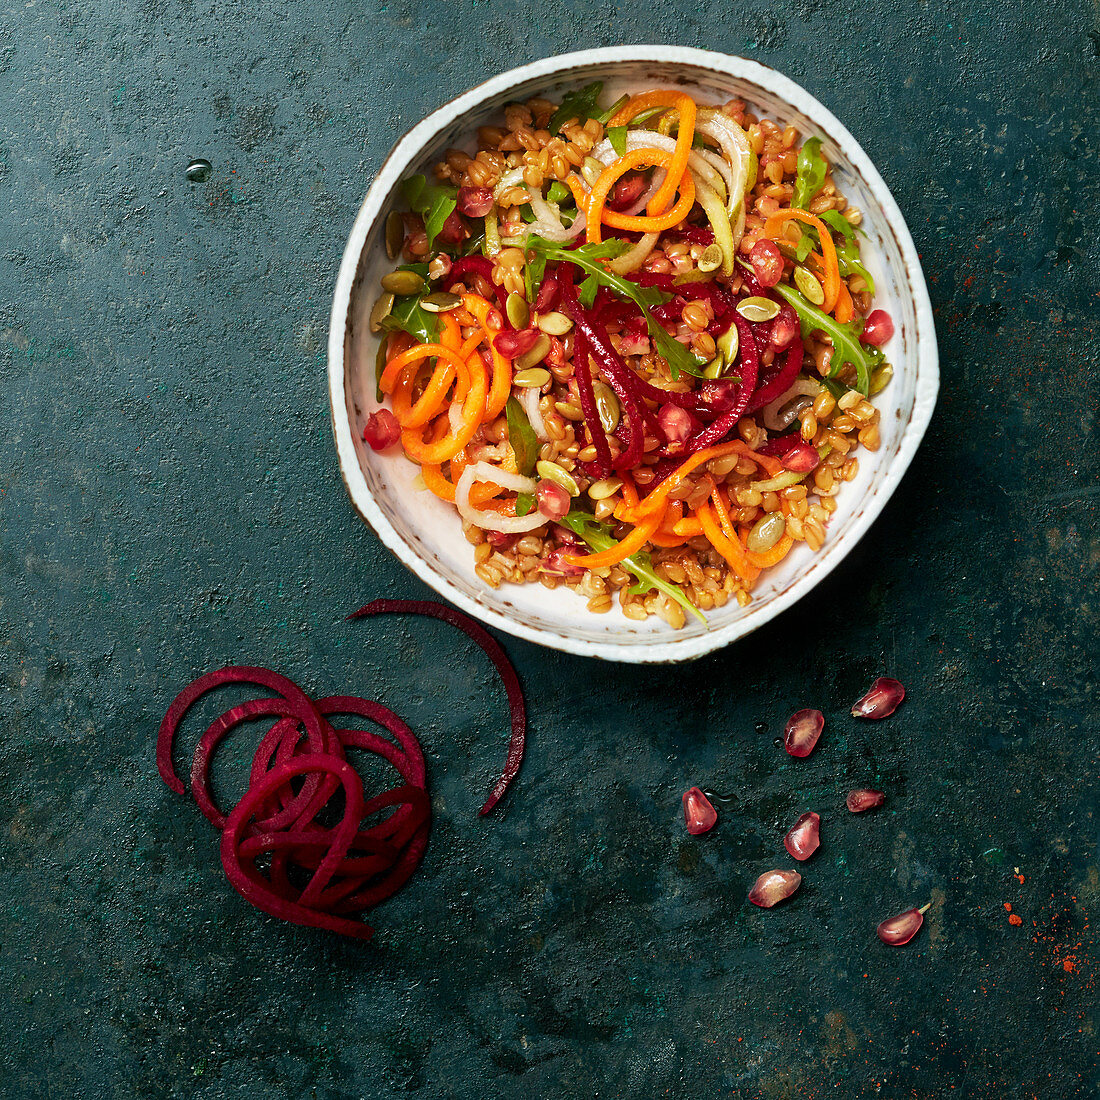 Wheat salad with carrot and beetroot spaghetti